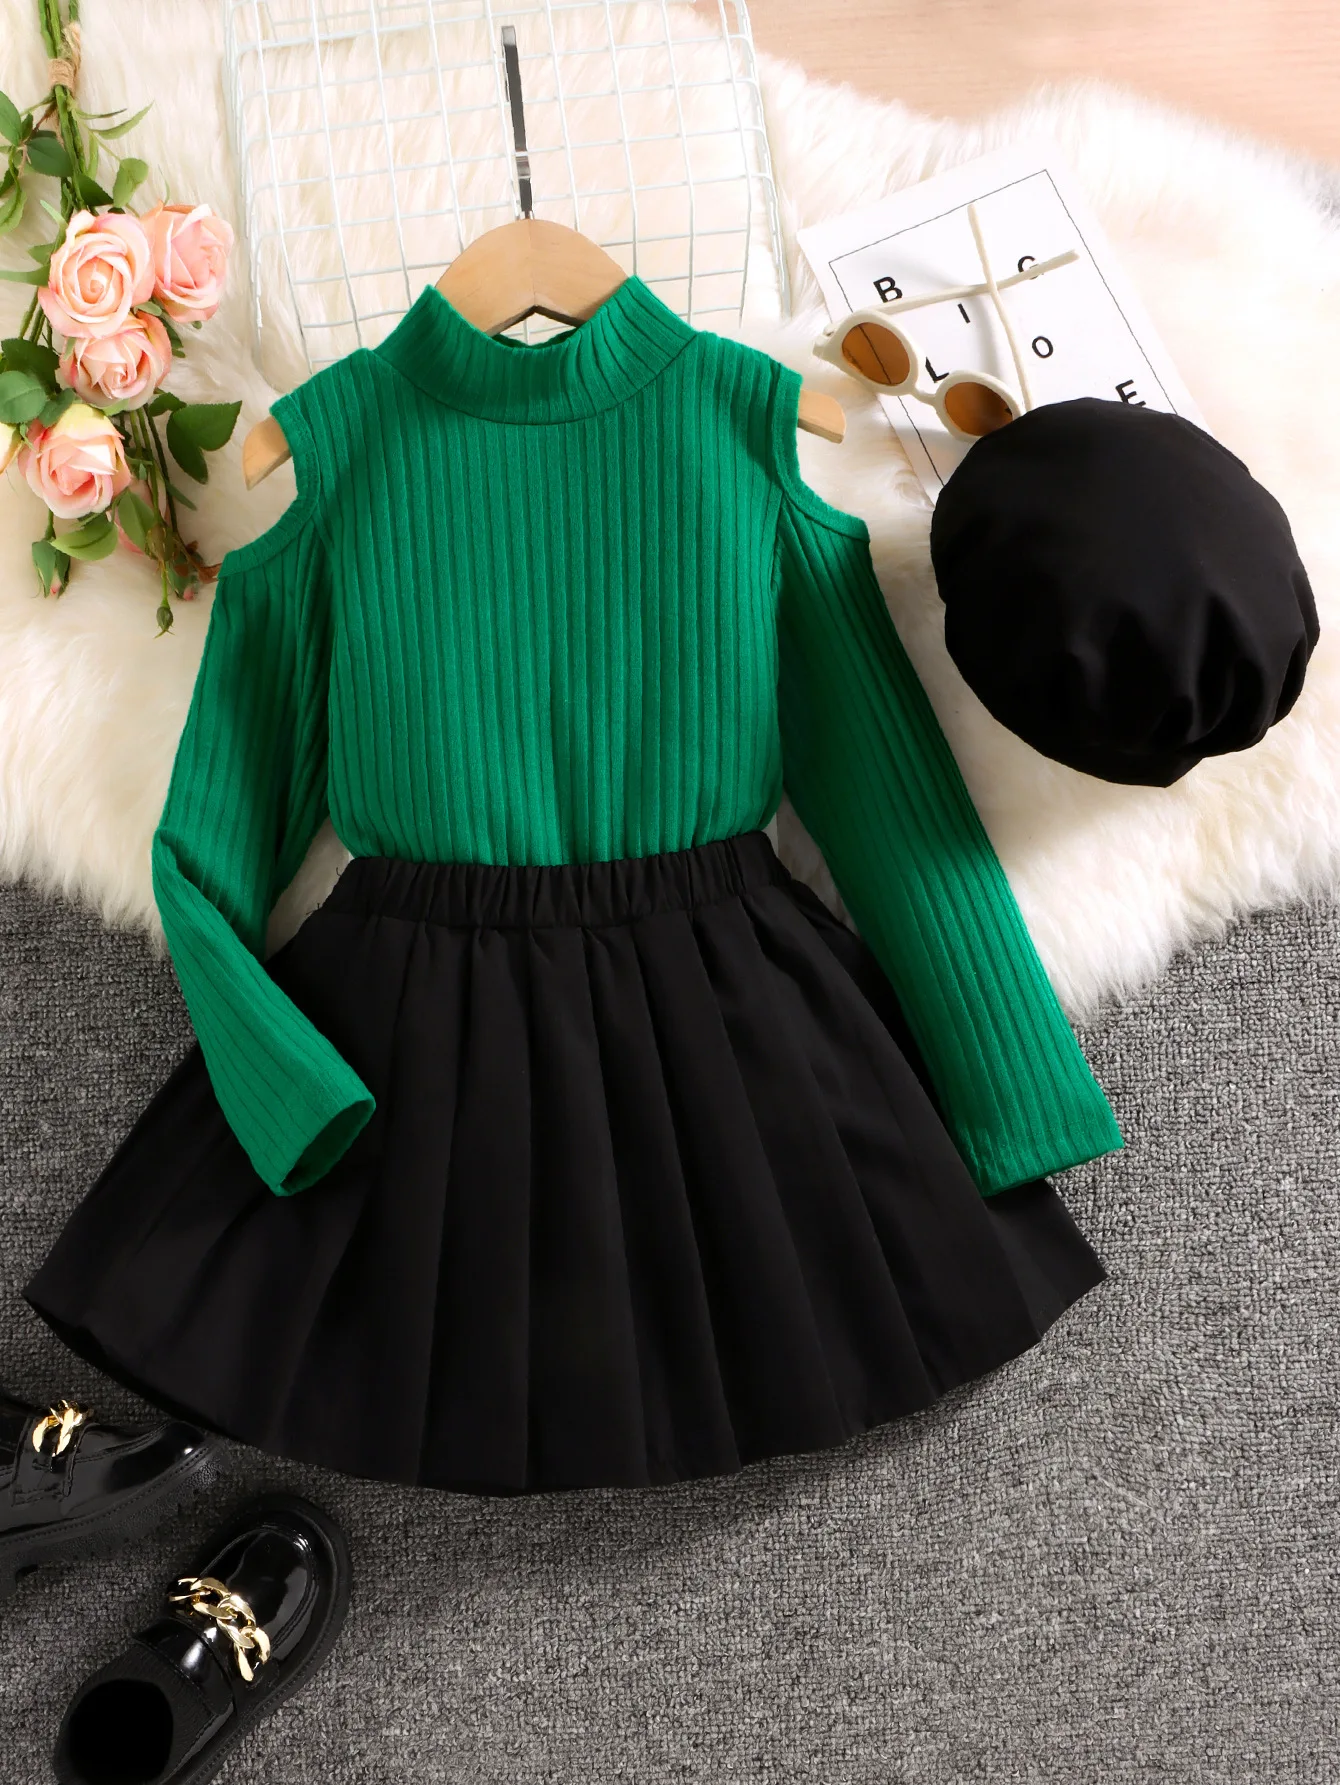 Korean style toddler girls clothing sets fashion off the shoulder long-sleeve shirts+skirt+hat 3pcs kids clothes fall outfits